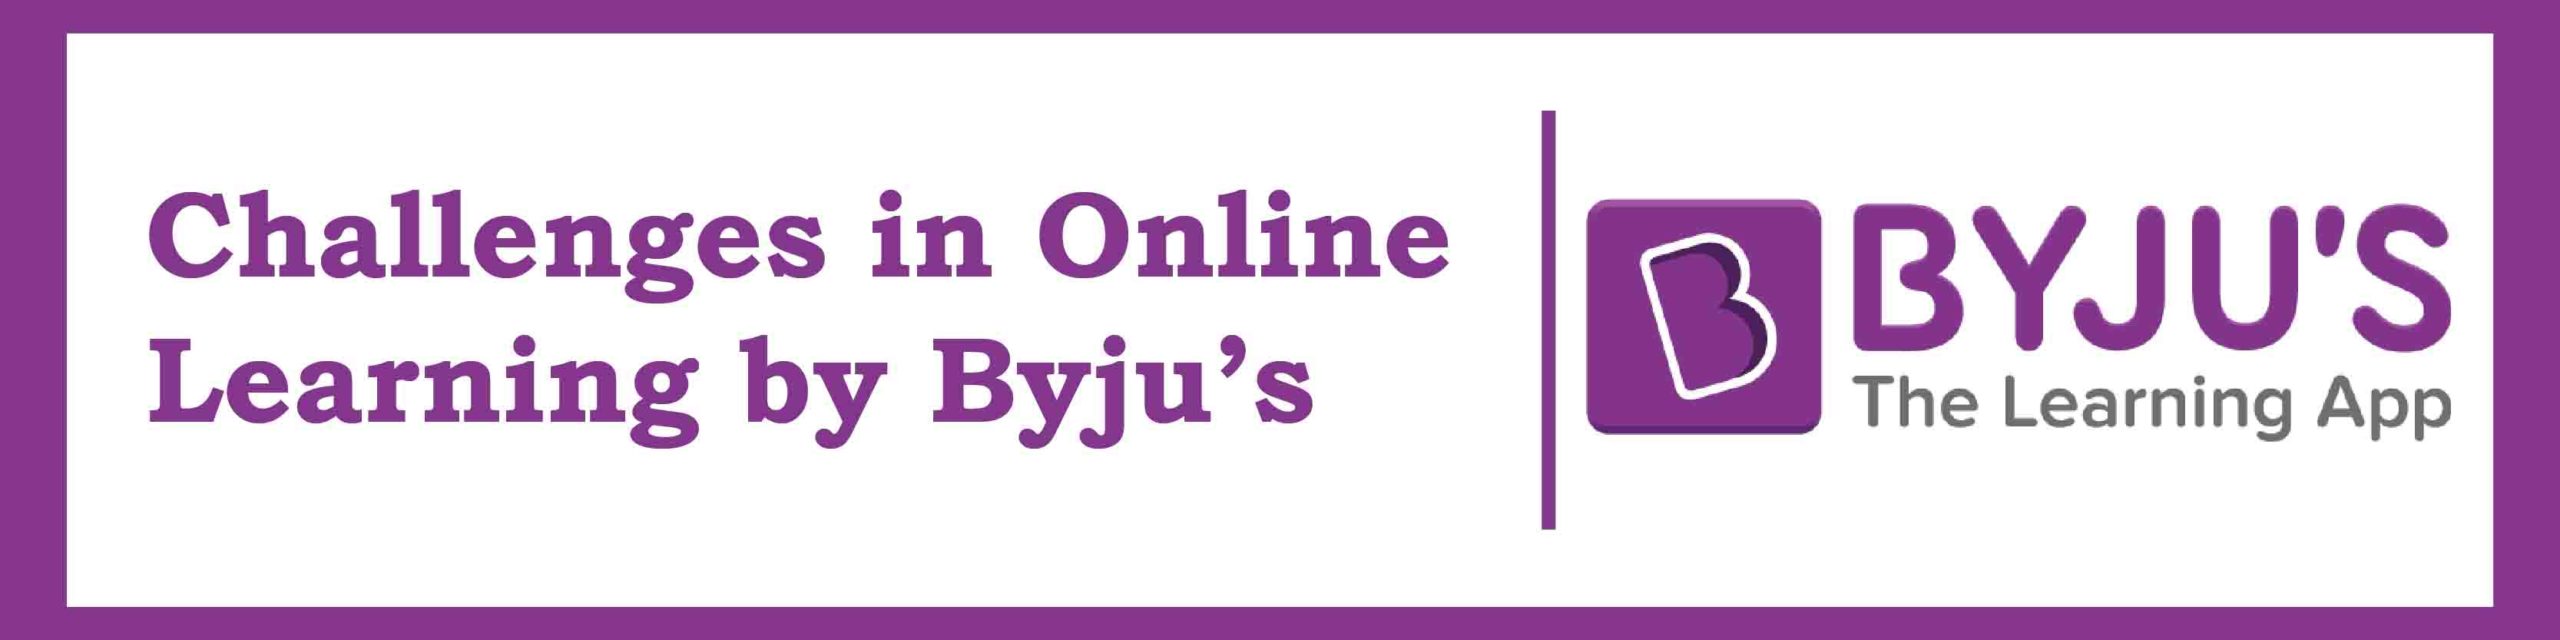 Challenges in Online Learning by Byju’s